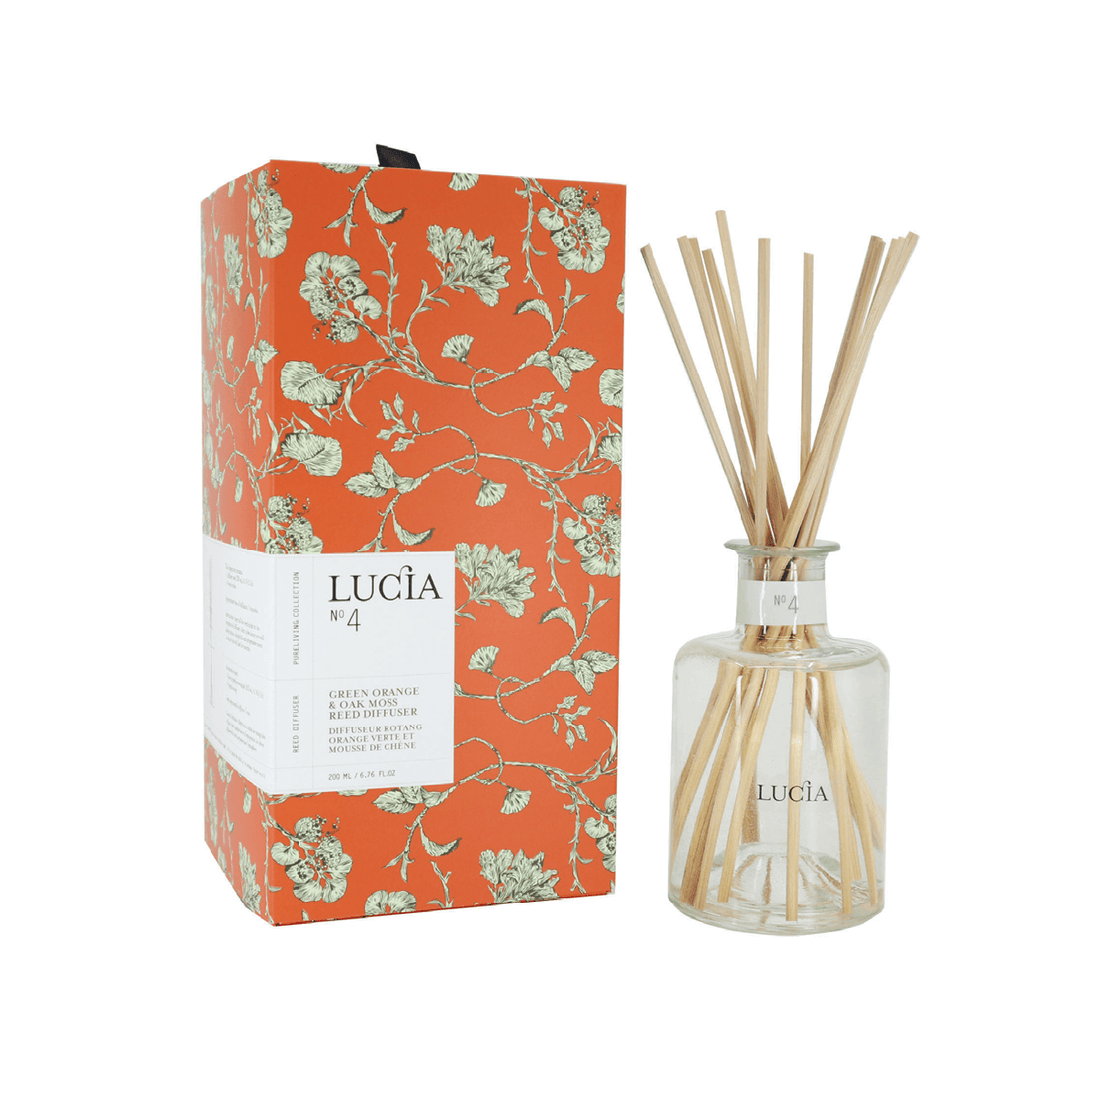 LUCIA Aromatic Reed Diffuser